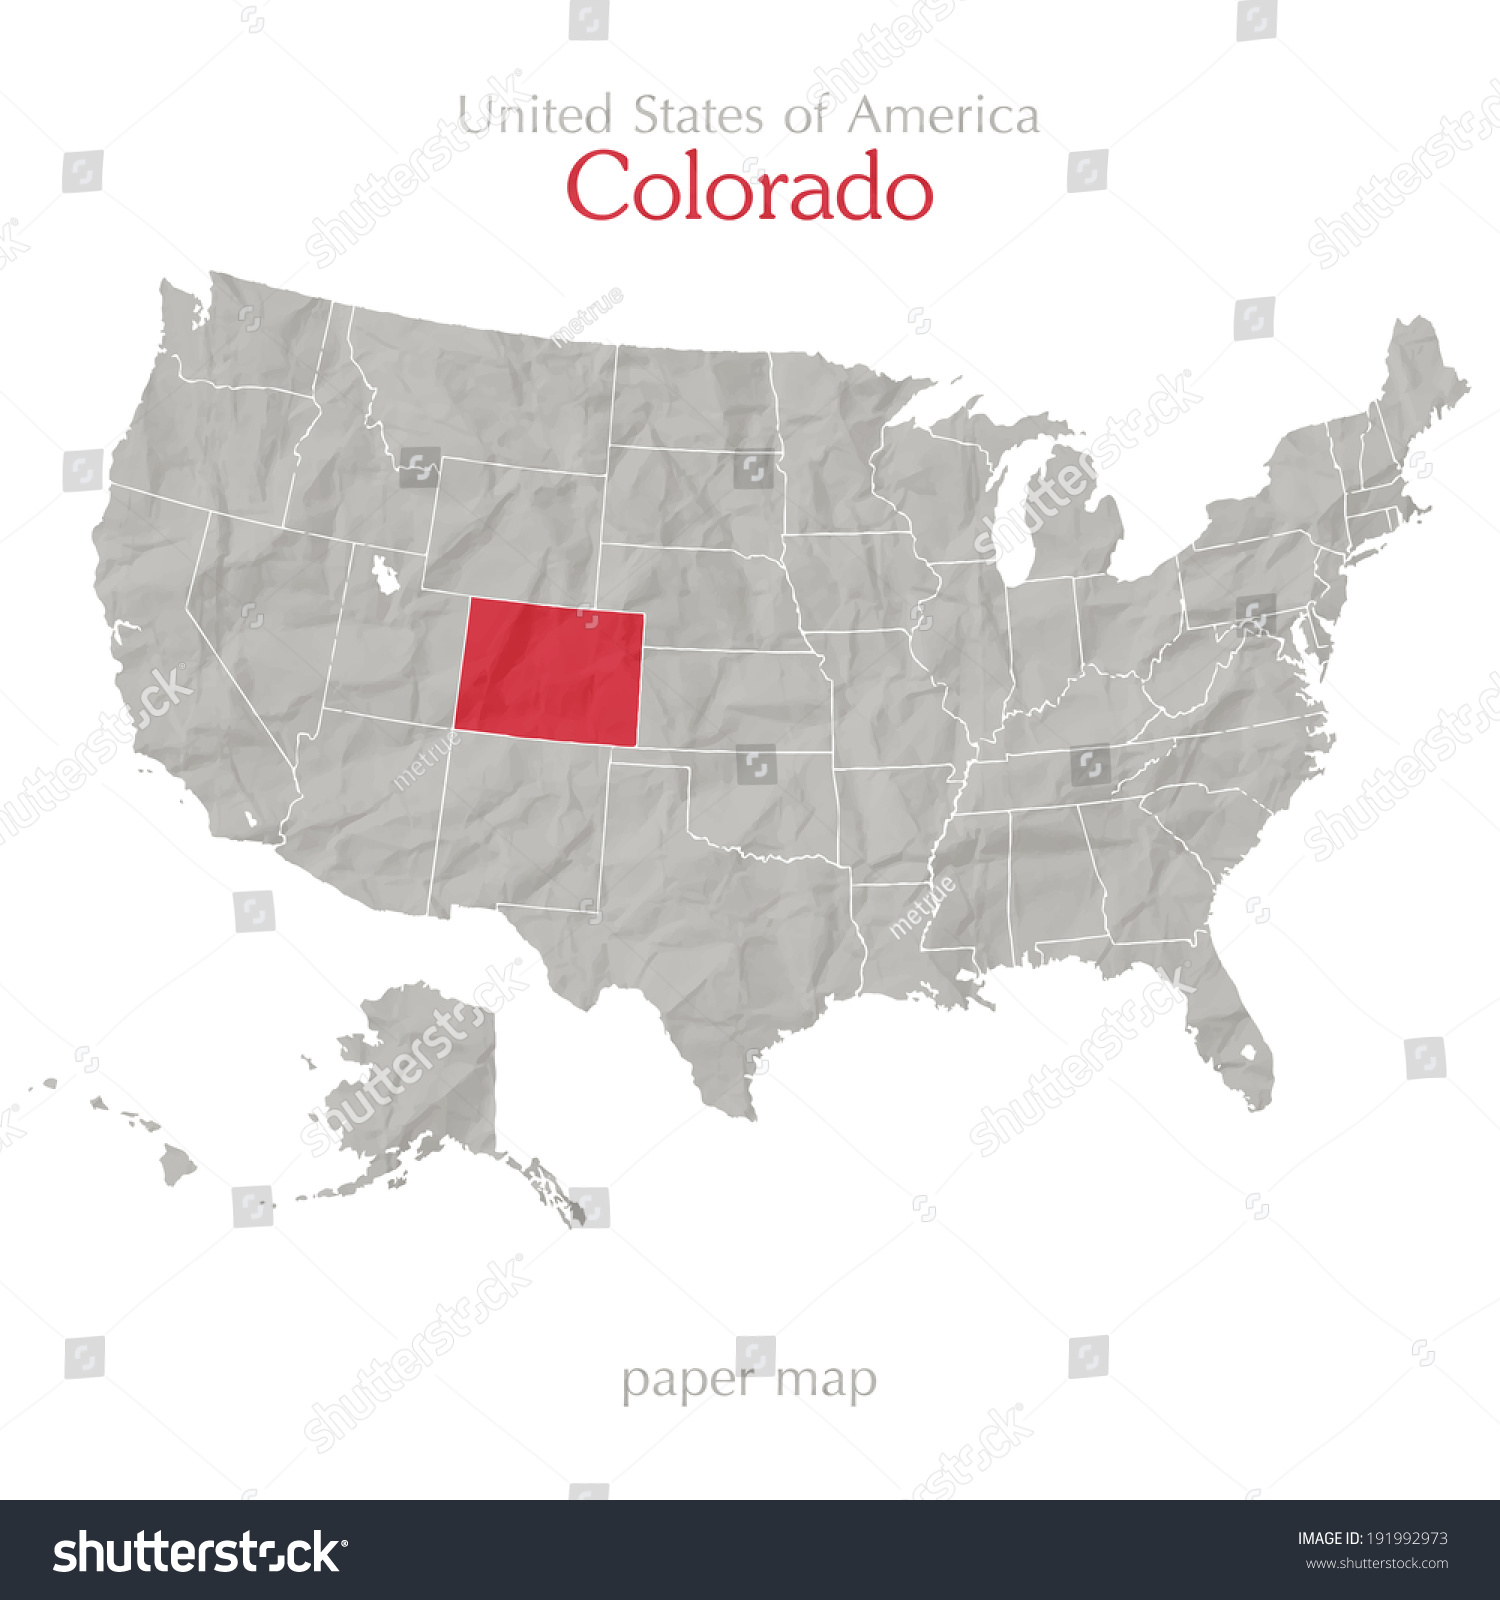 Colorado On Map Of America United States America Map Colorado Territory Stock Vector (Royalty Free)  191992973 | Shutterstock